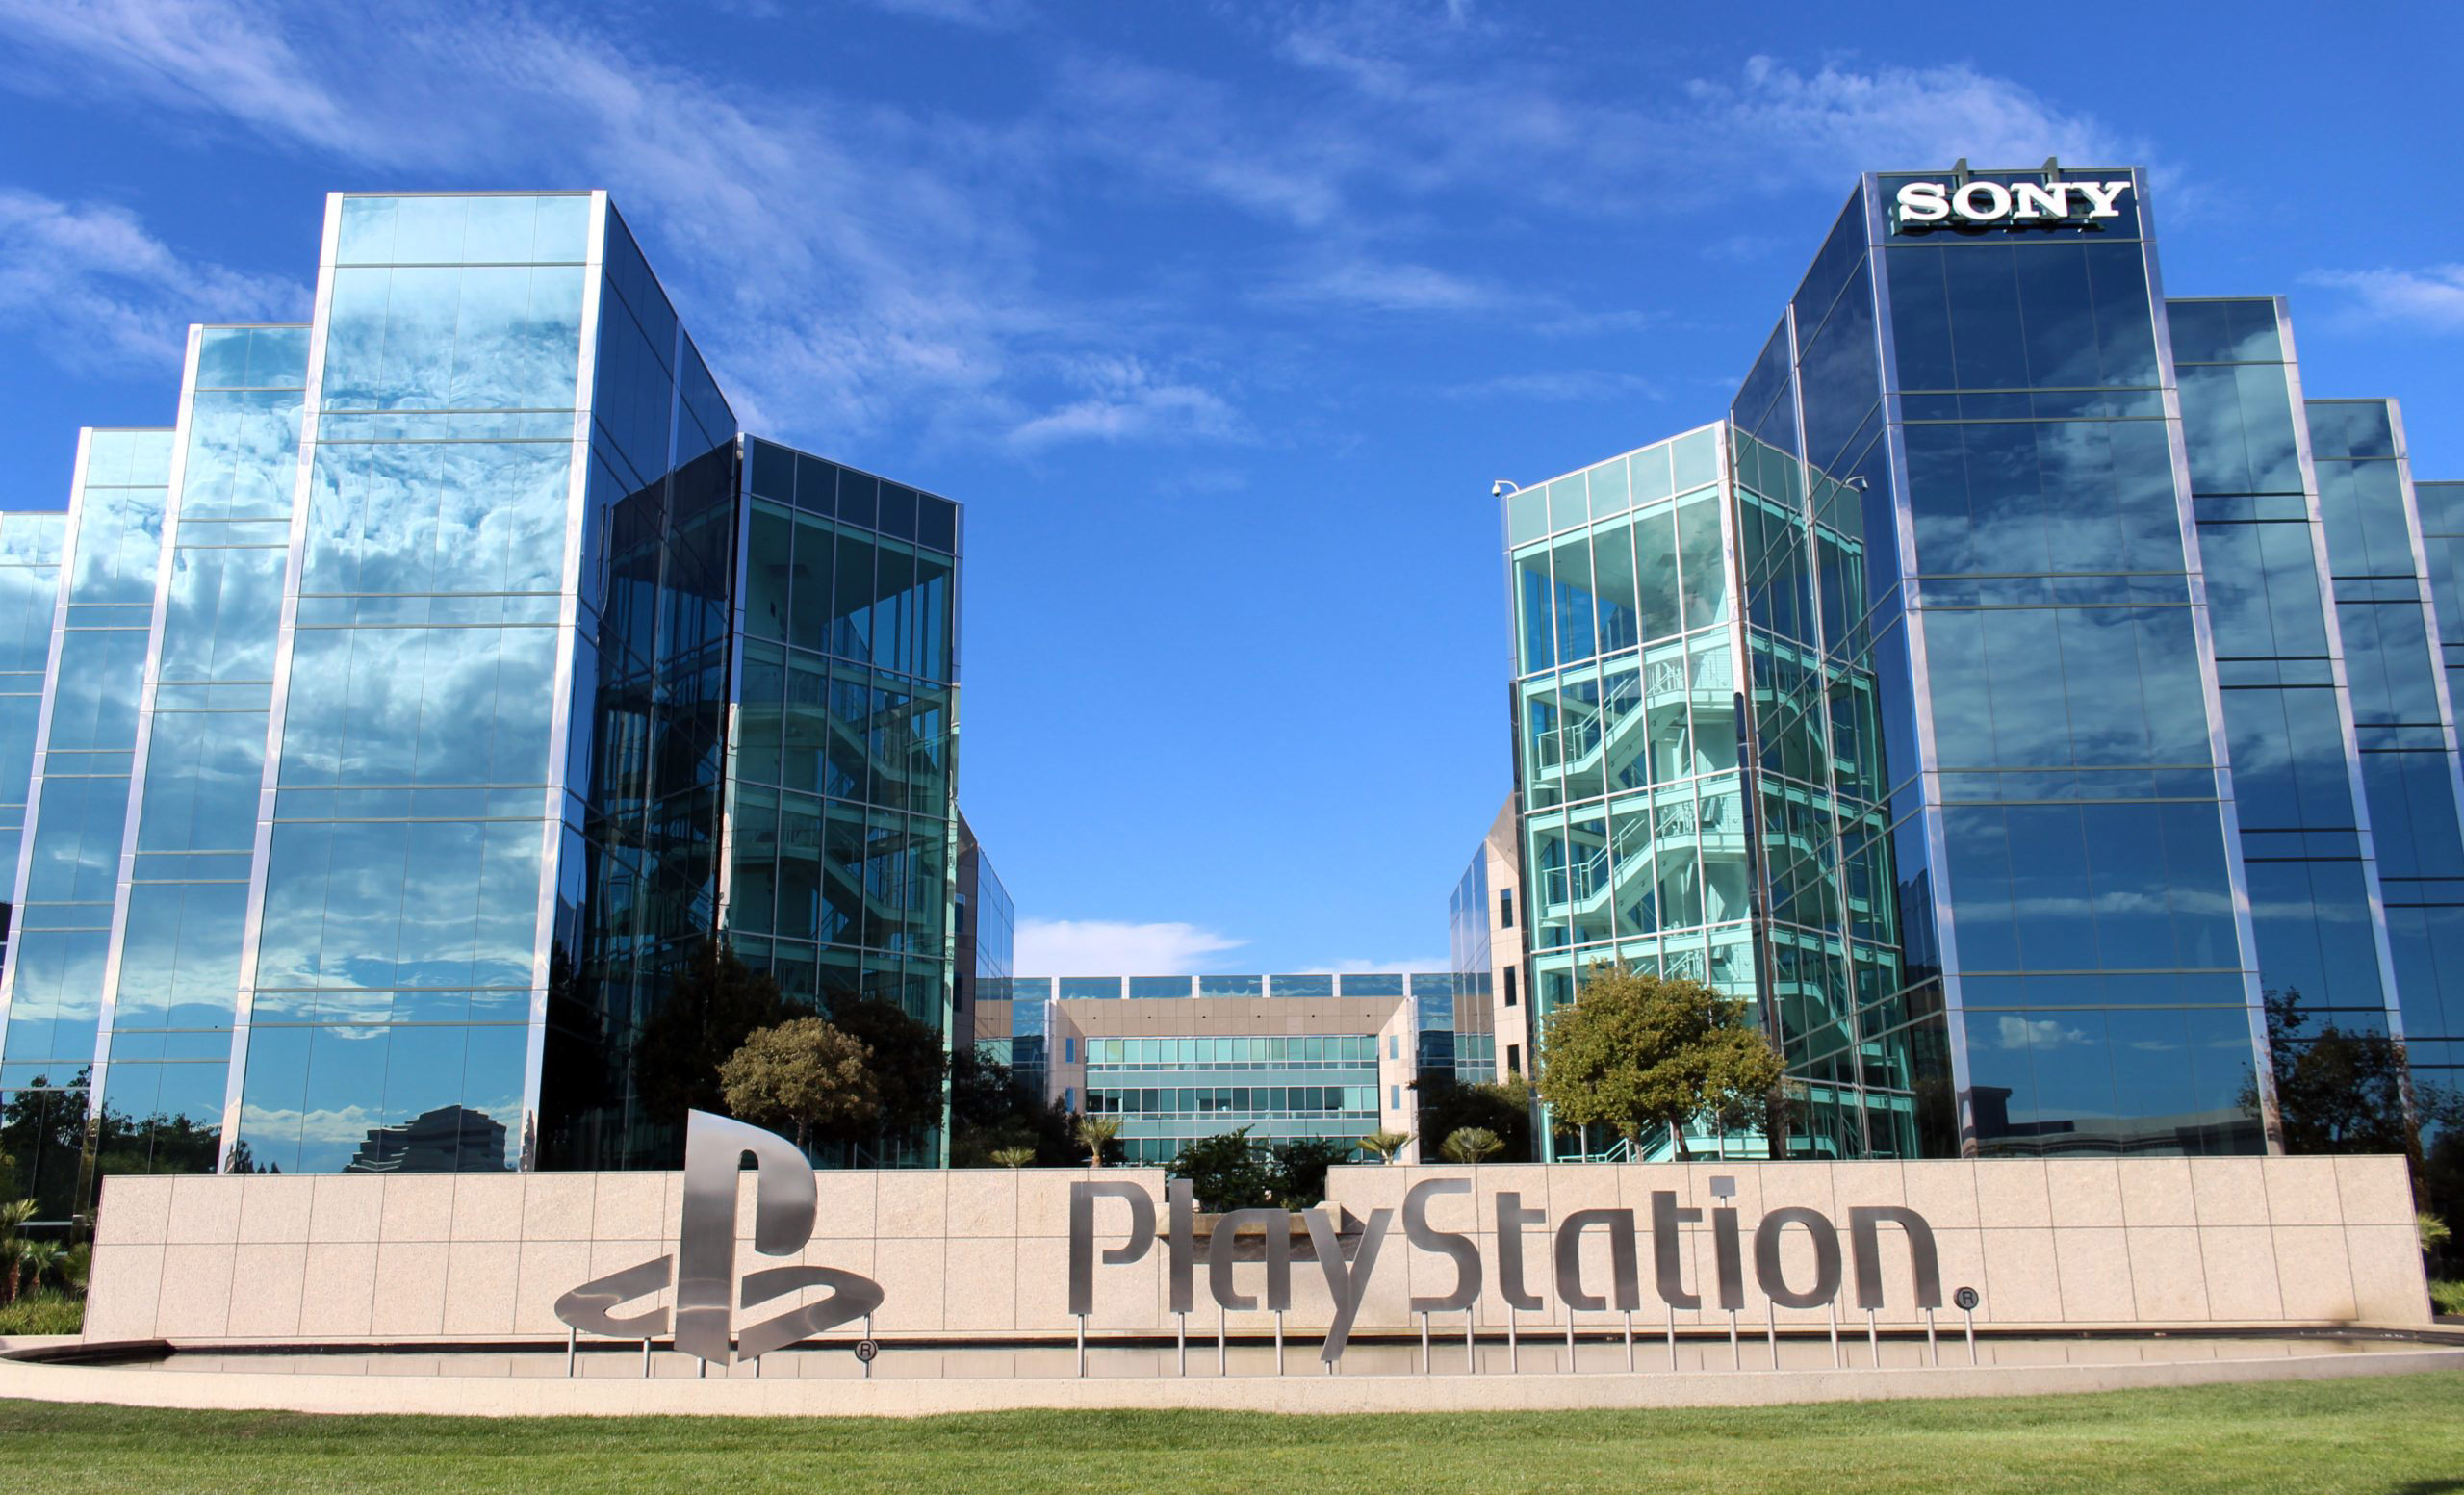 PlayStation confirms data breach exposed personal information of 7,000